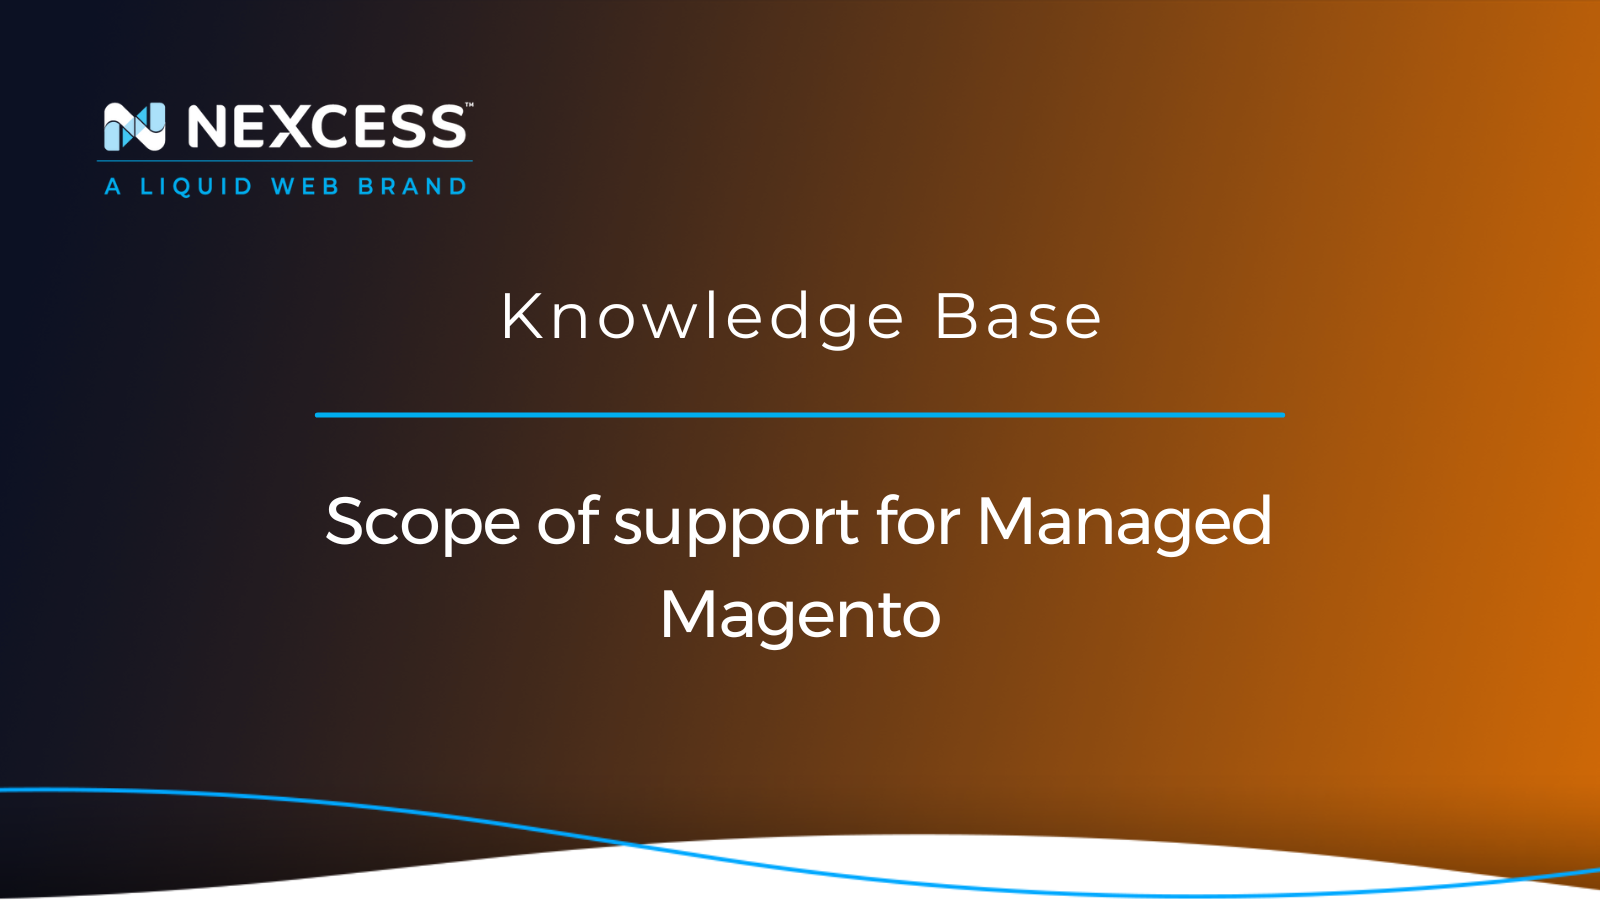 Scope of support for Managed Magento